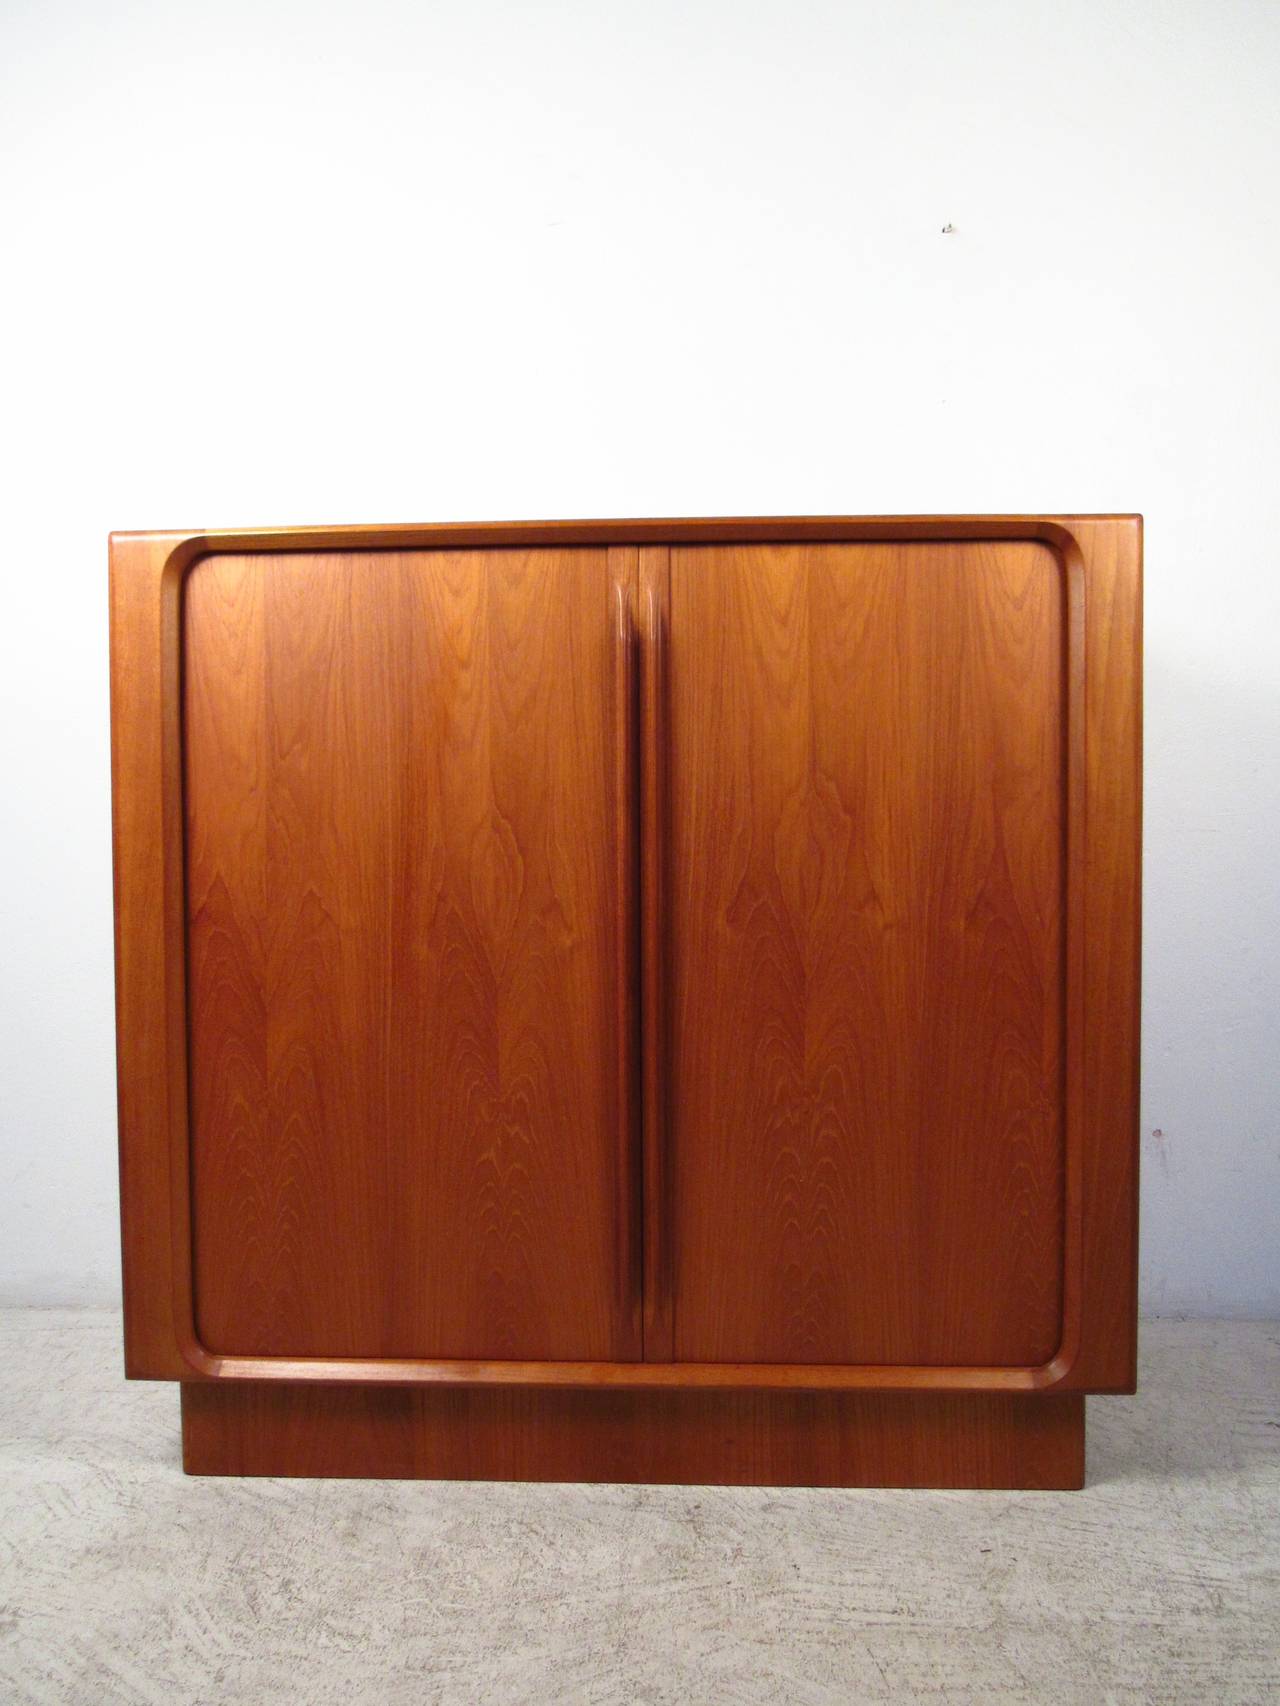 This beautiful mid-century style tambour front chest was wonderfully crafted by Bernhard Pedersen & Sons, and offers plenty of storage in a stylish package. Wonderful teak finish, quality craftsmanship, and finished back set this piece apart from